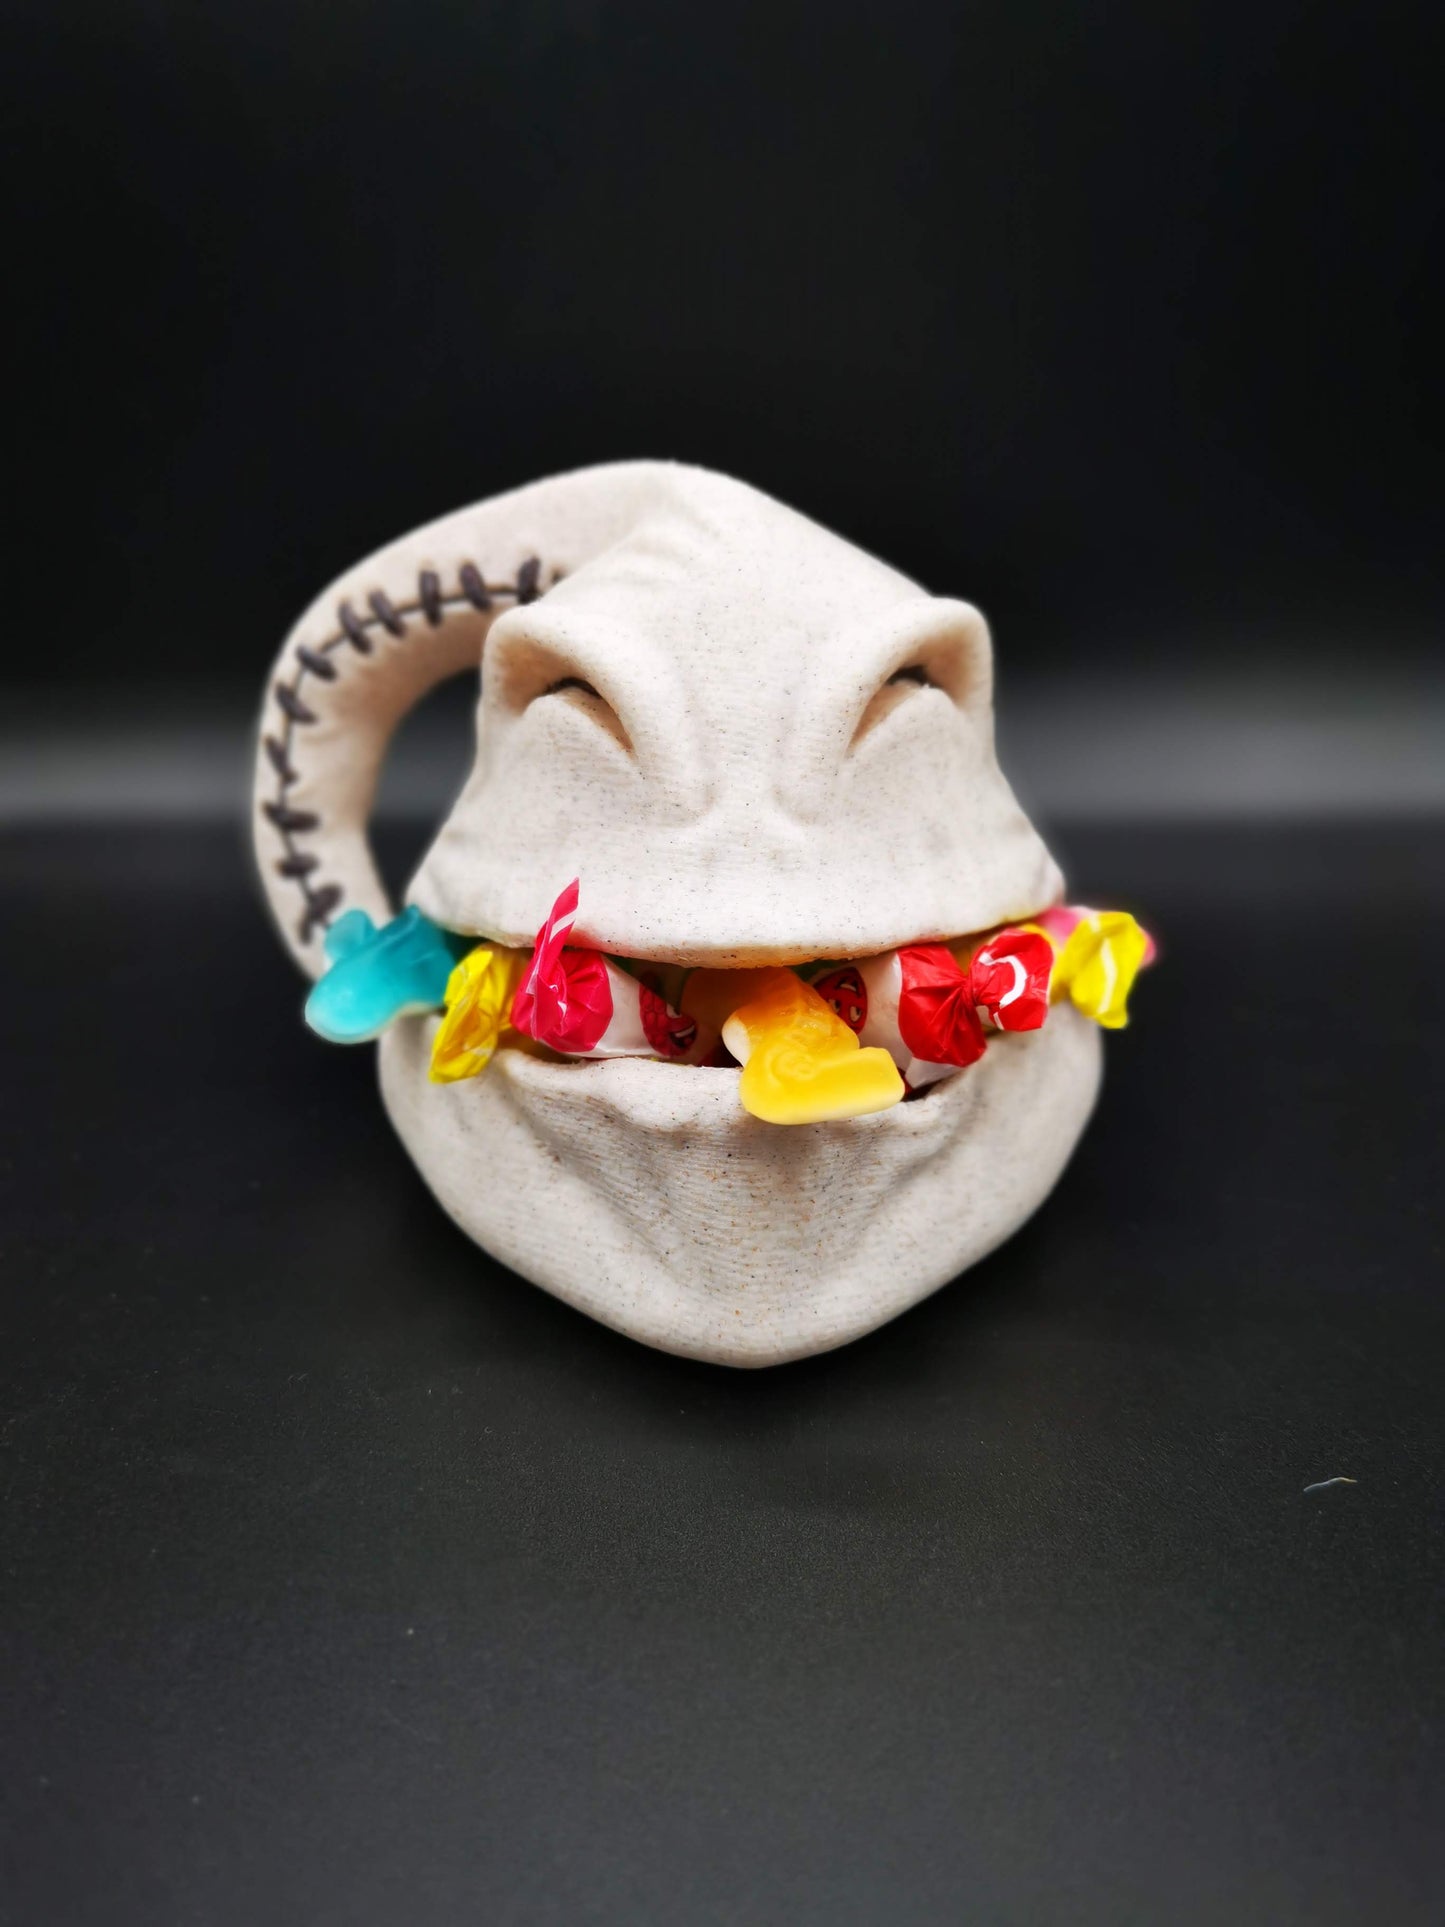 Oogie Boogie candy bowl from the front